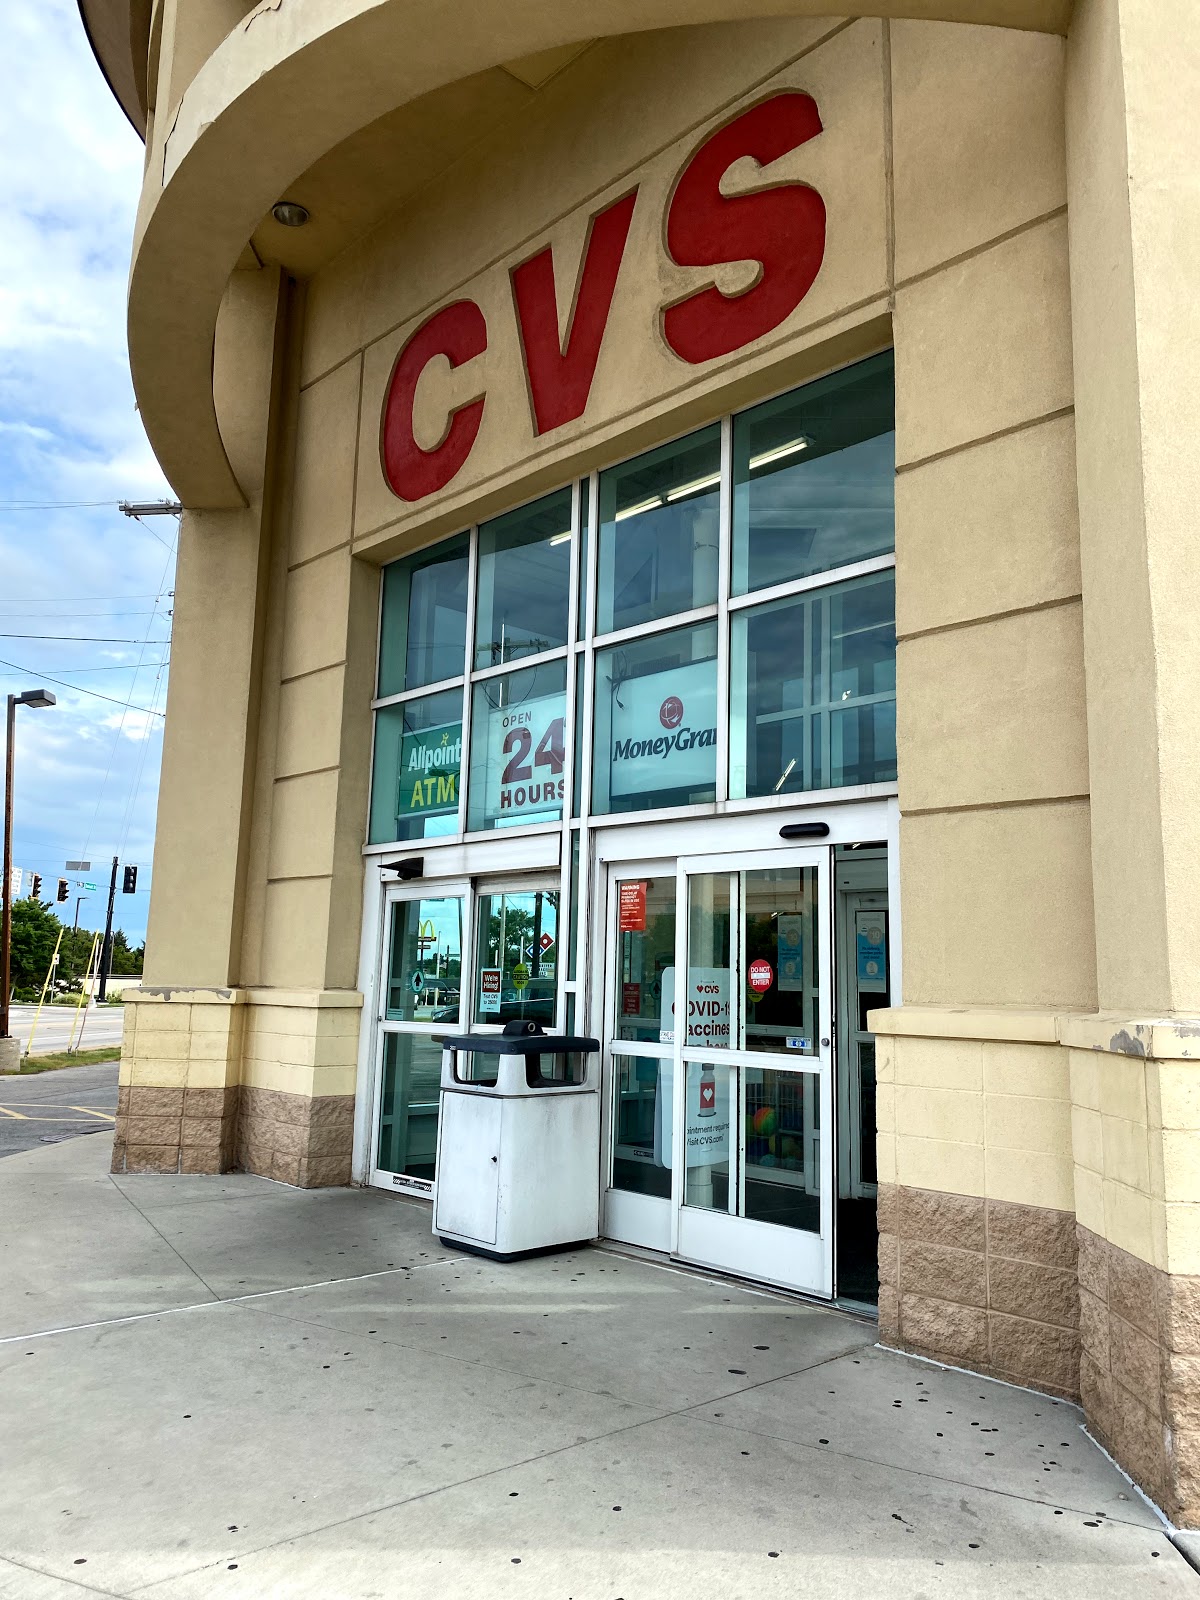 Photo of CVS MinuteClinic Warsaw COVID Testing at 100 N Detroit St, Warsaw, IN 46580, USA